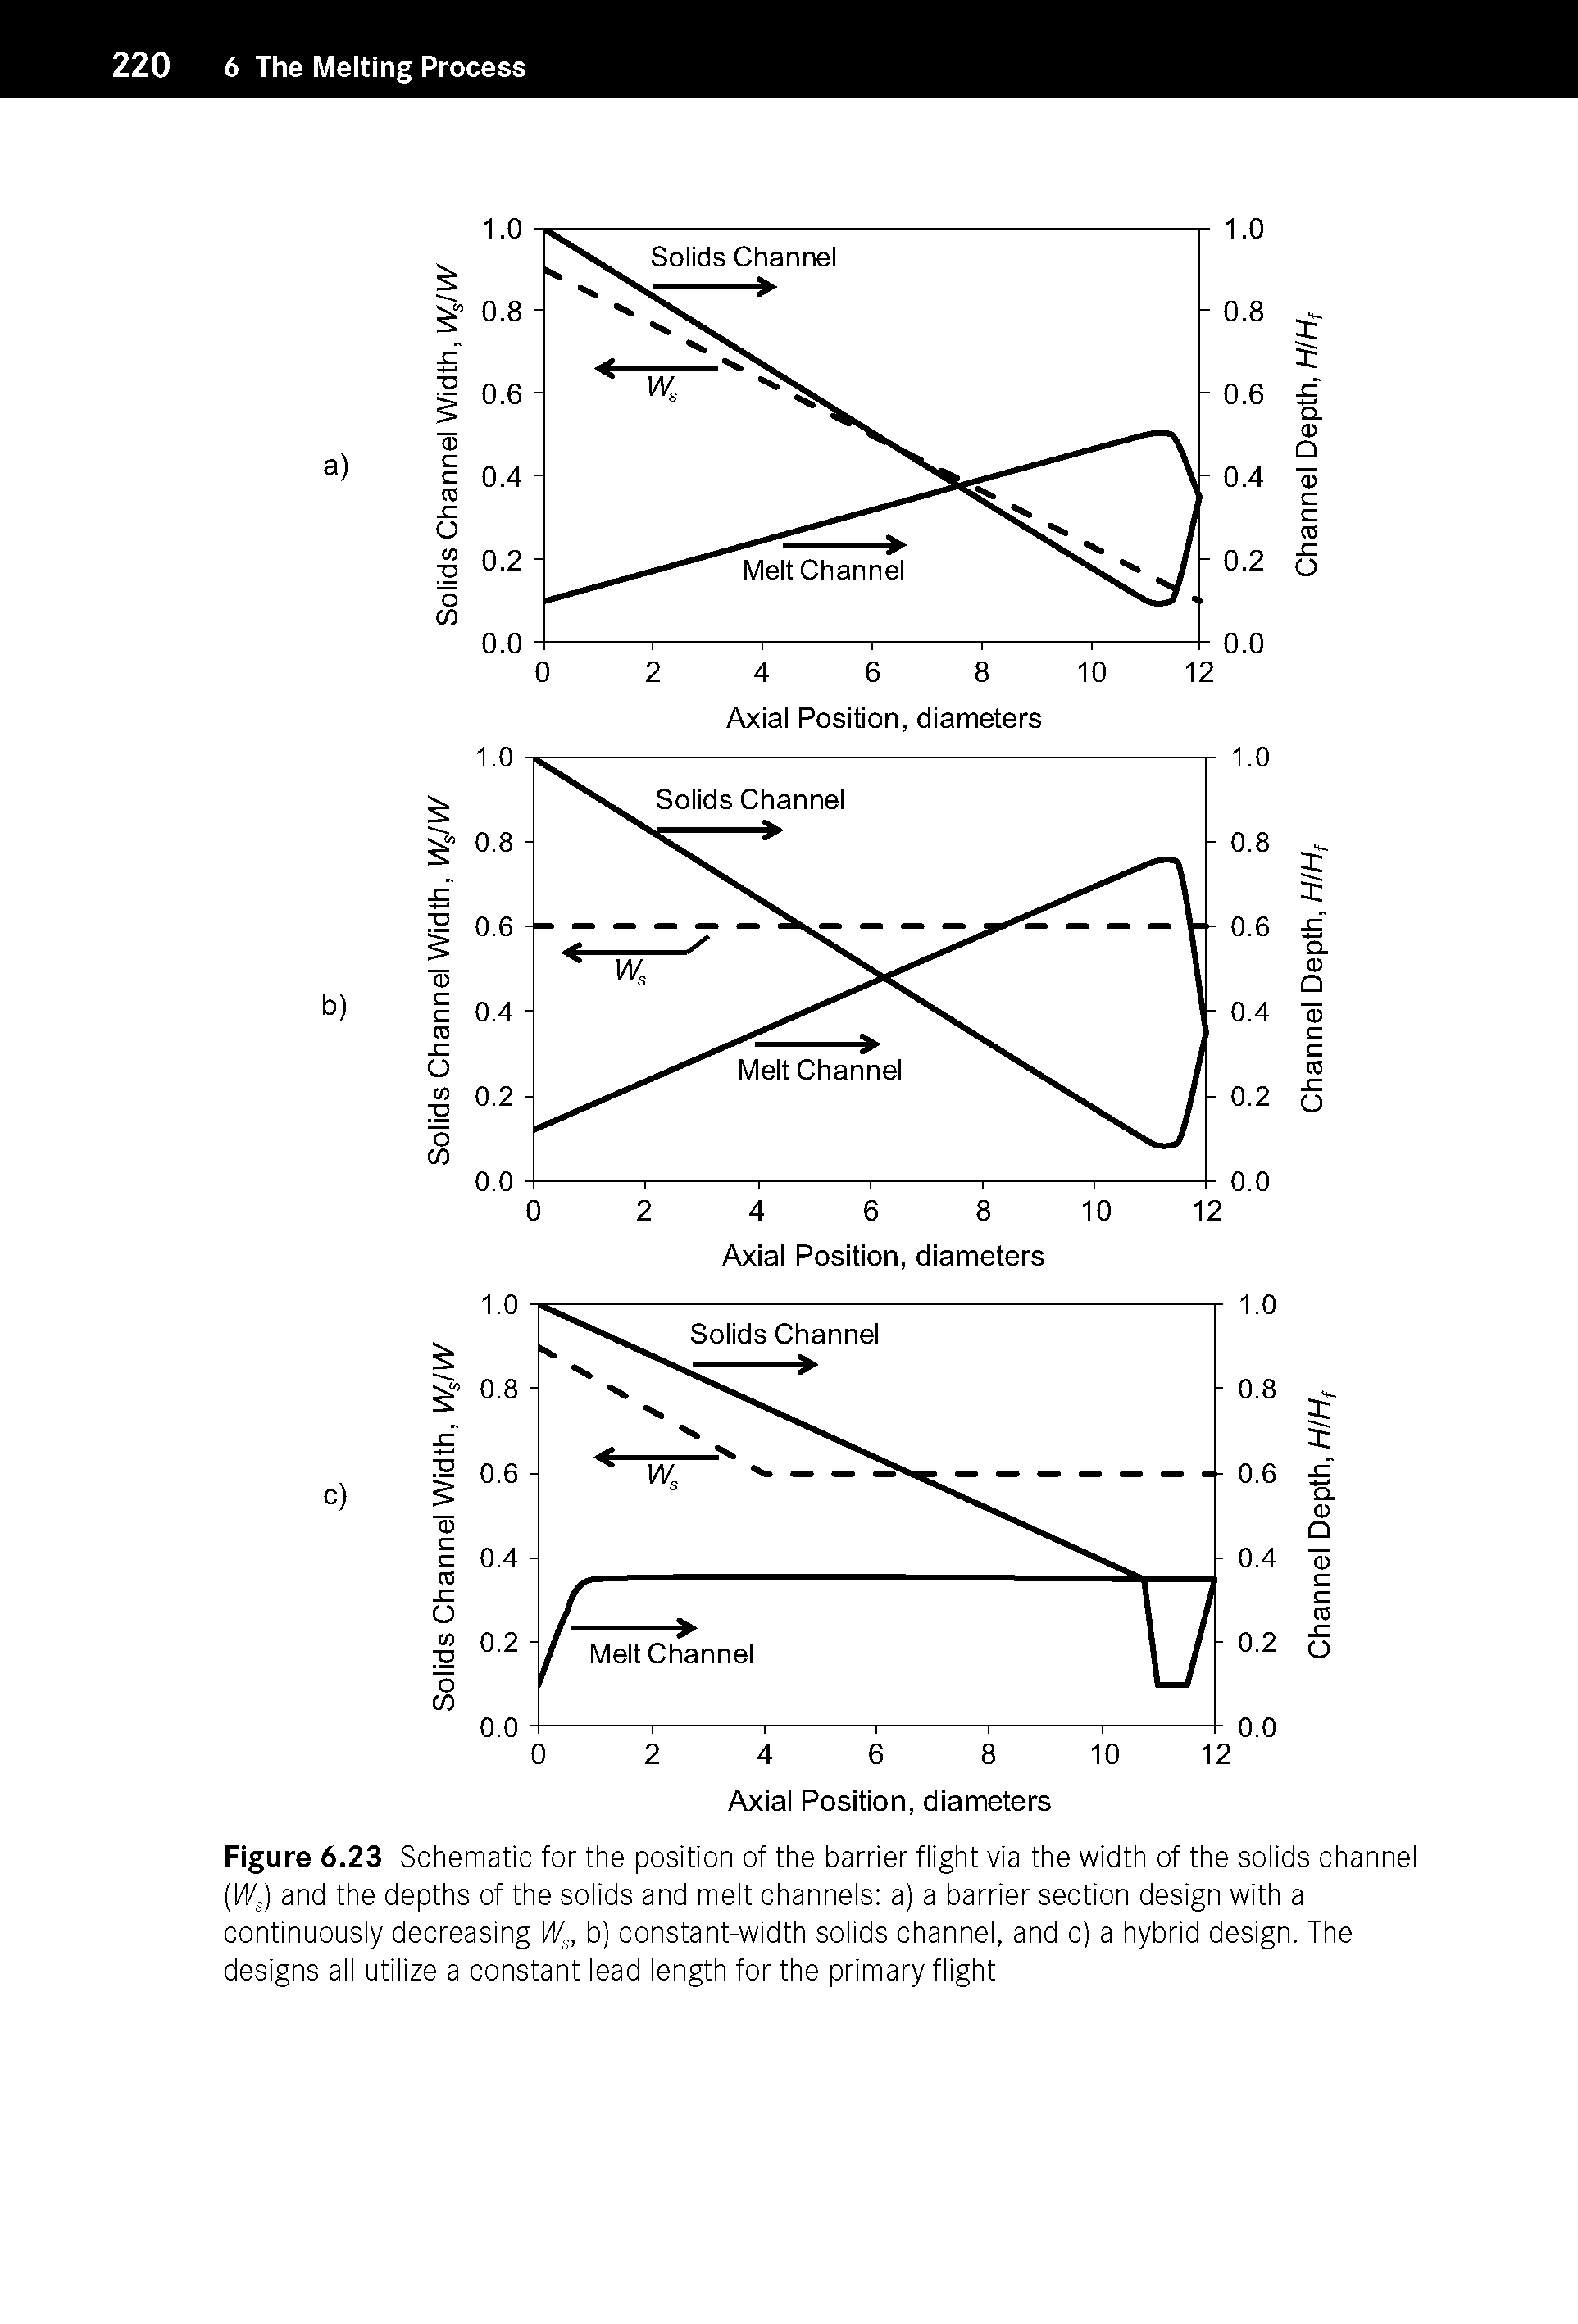 Figure 6.23 Schematic for the position of the barrier flight via the width of the solids channel [W,) and the depths of the solids and melt channels a) a barrier section design with a continuously decreasing /V b) constant-width solids channel, and c) a hybrid design. The designs all utilize a constant lead length for the primary flight...